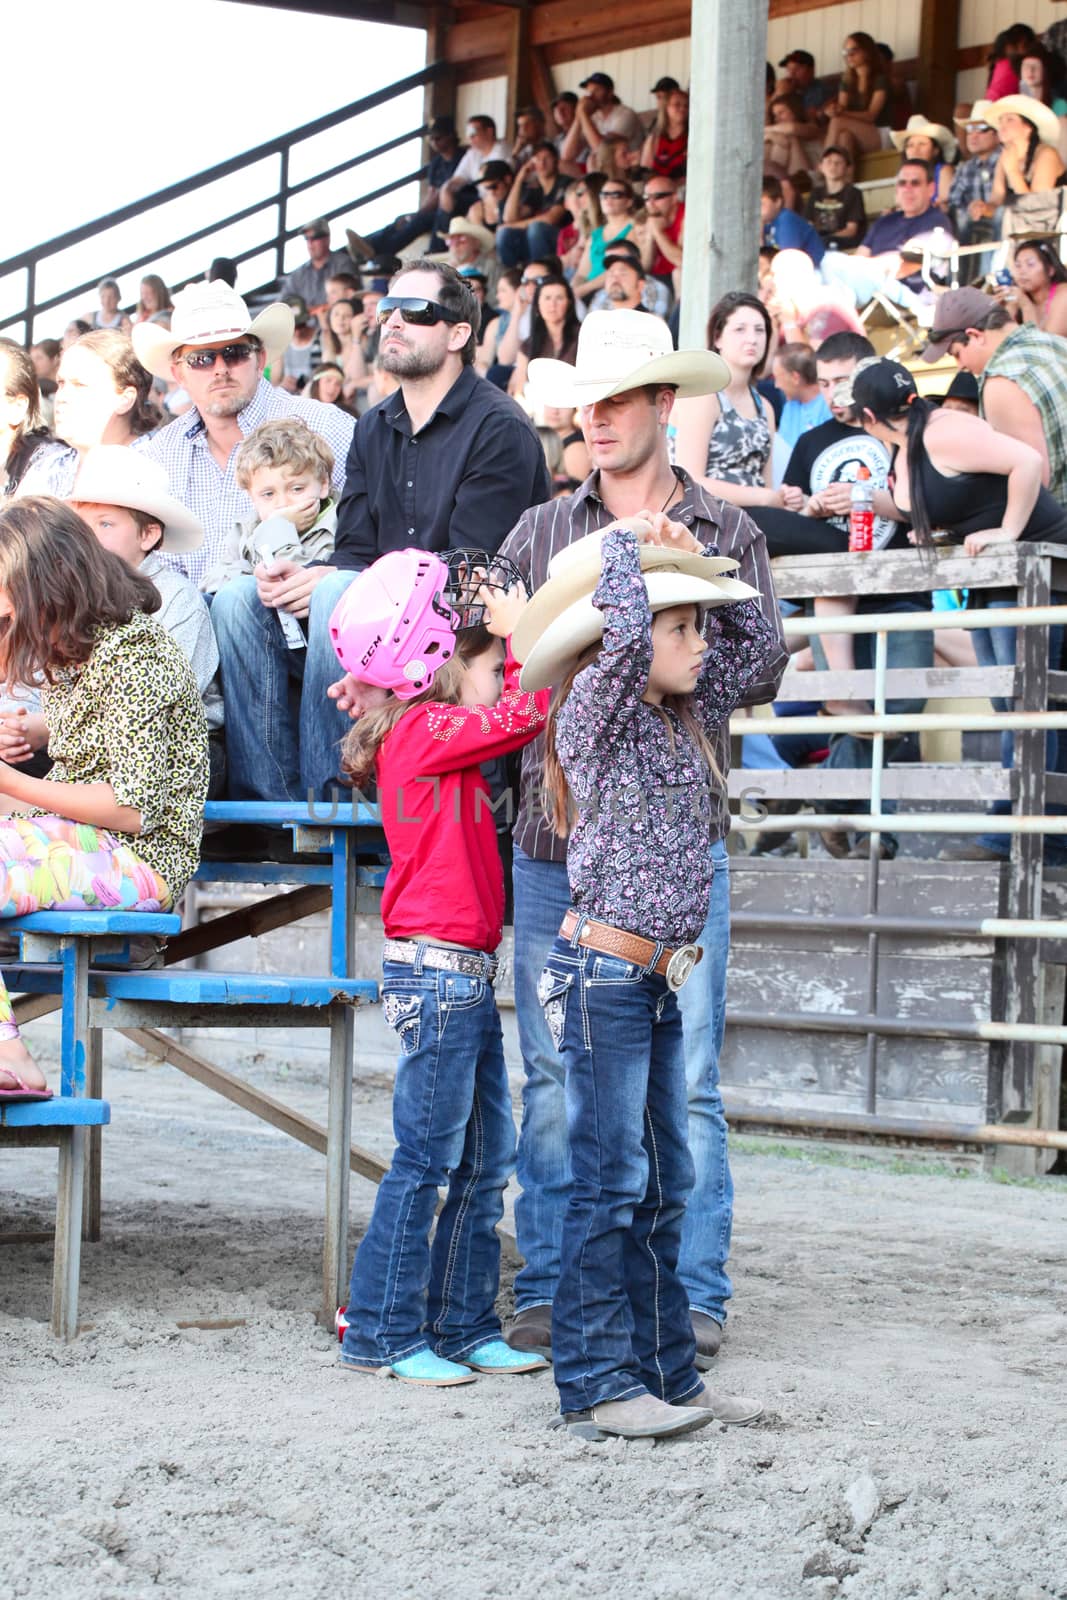 MERRITT, B.C. CANADA - May 30, 2015: Spectators at The 3rd Annual Ty Pozzobon Invitational PBR Event.